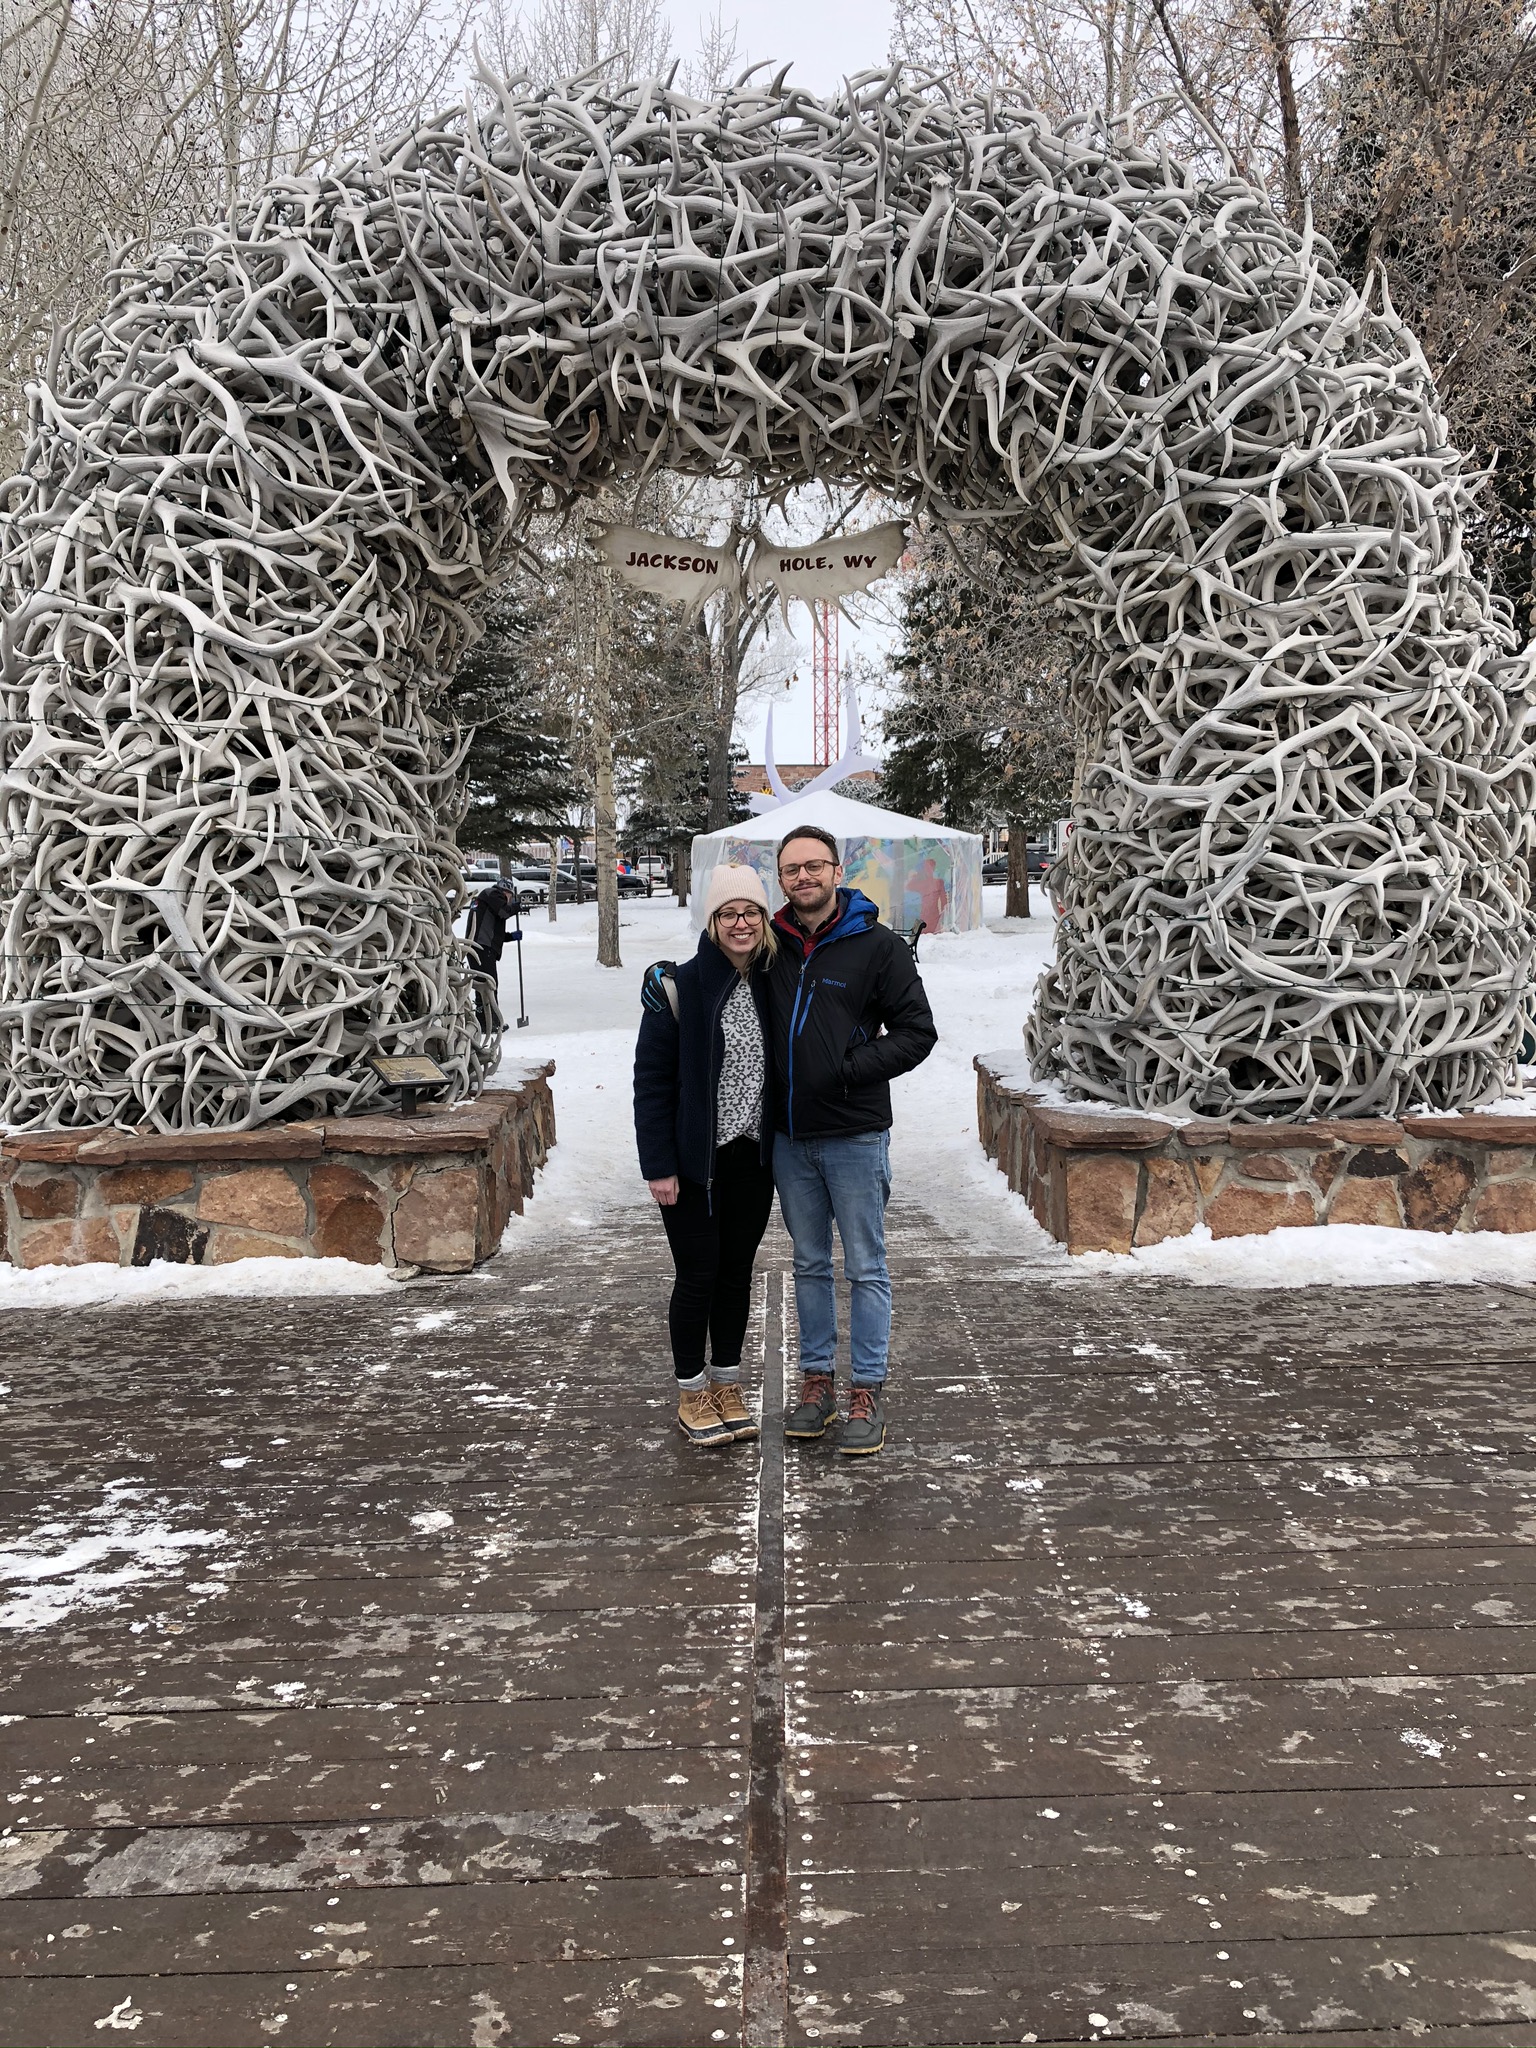 The Jackson Hole Antler Arches